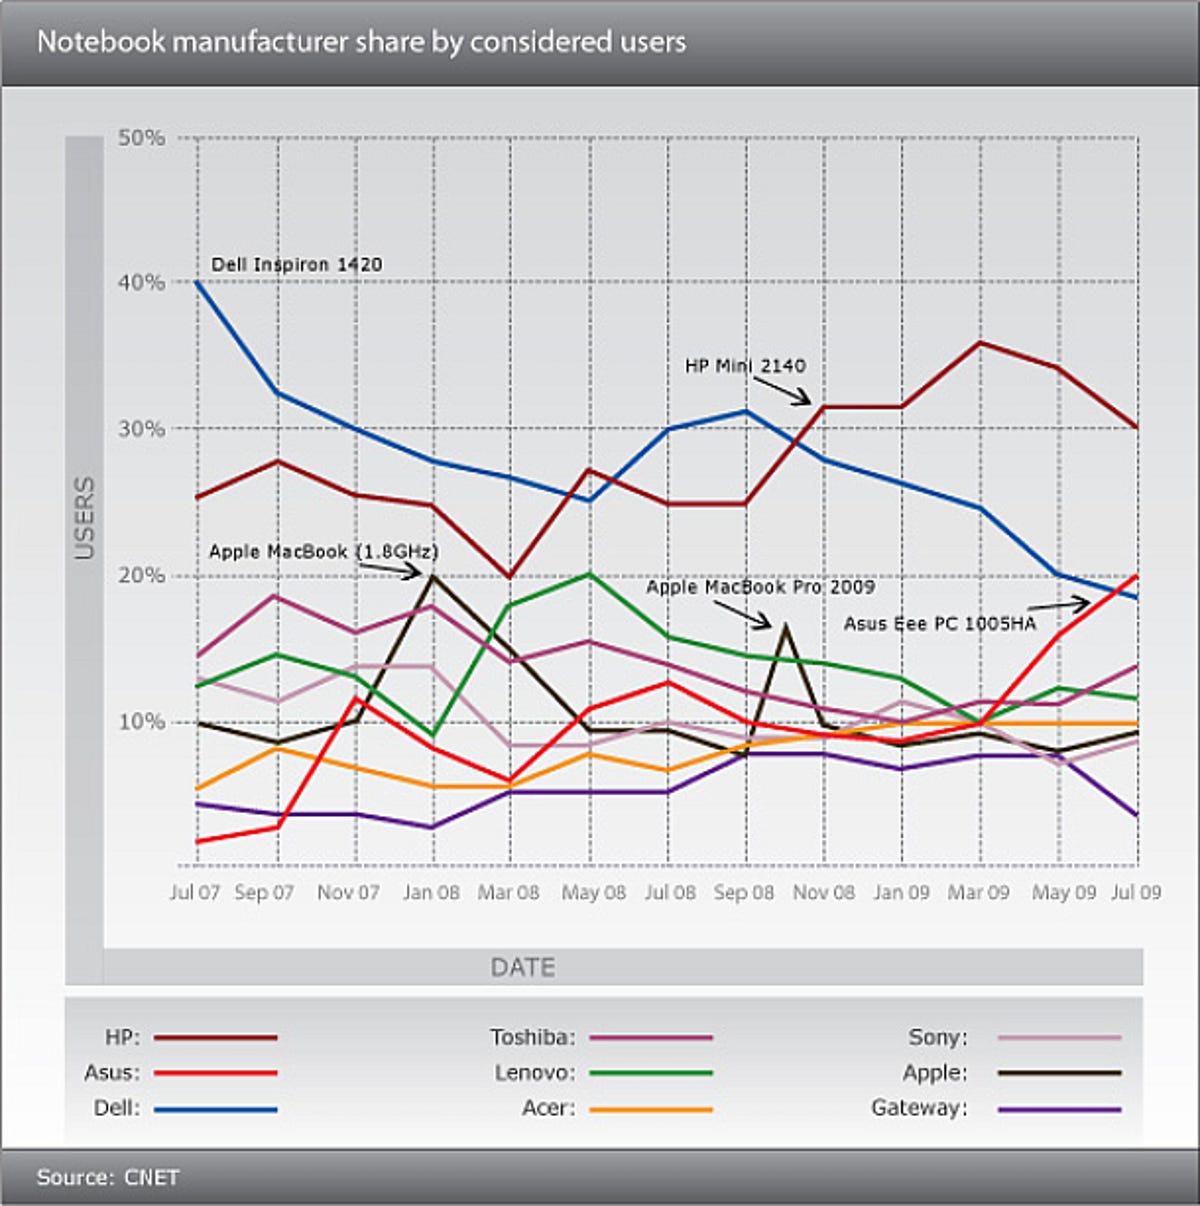 Notebook manufacturer share by considered users